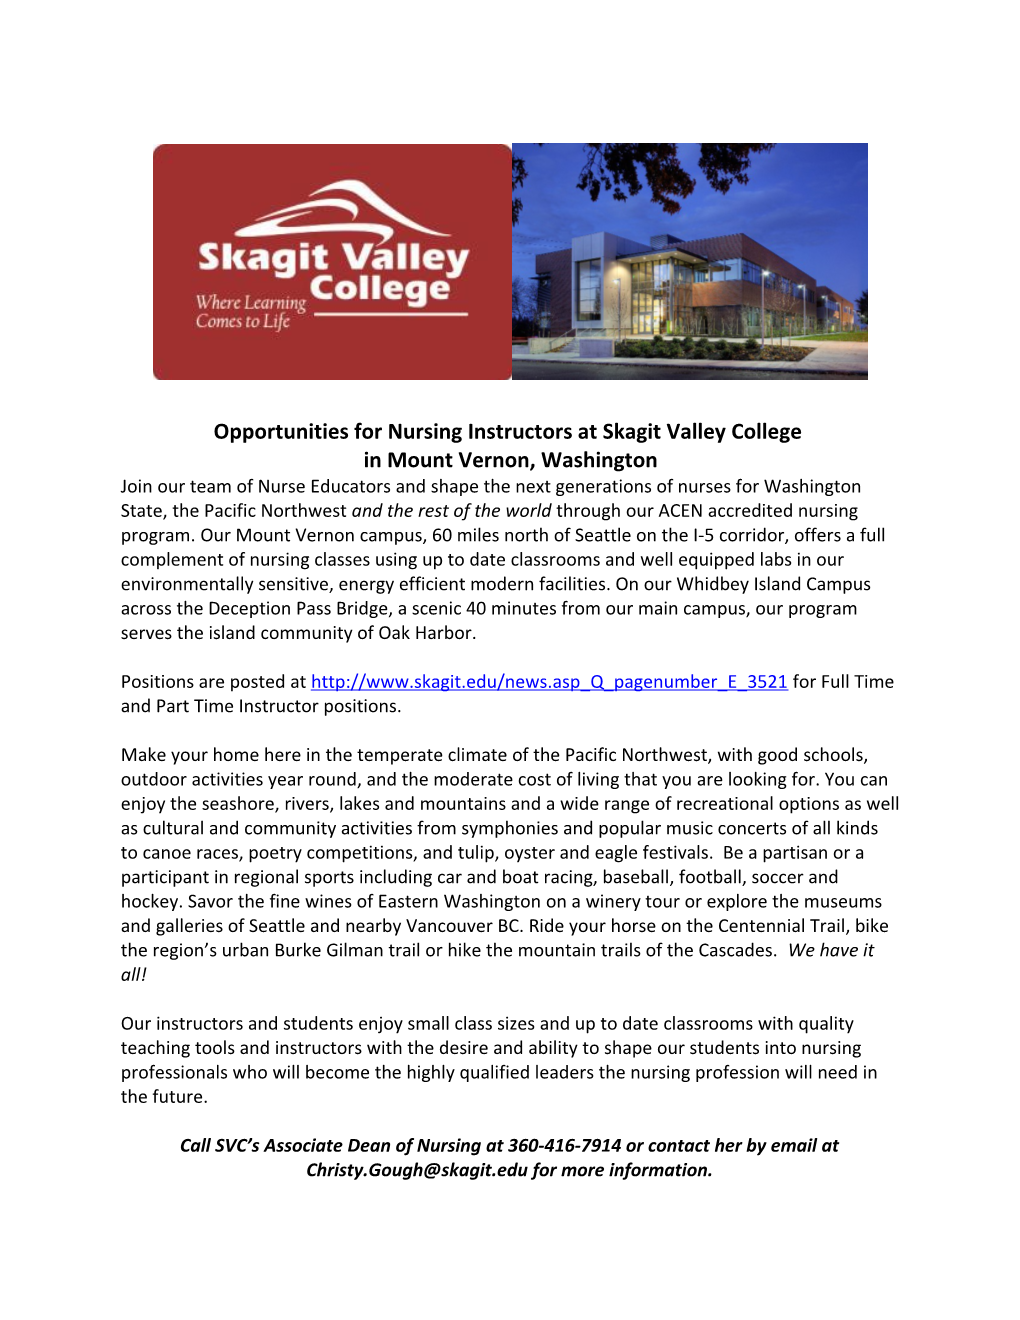 Opportunities for Nursing Instructors at Skagit Valley College